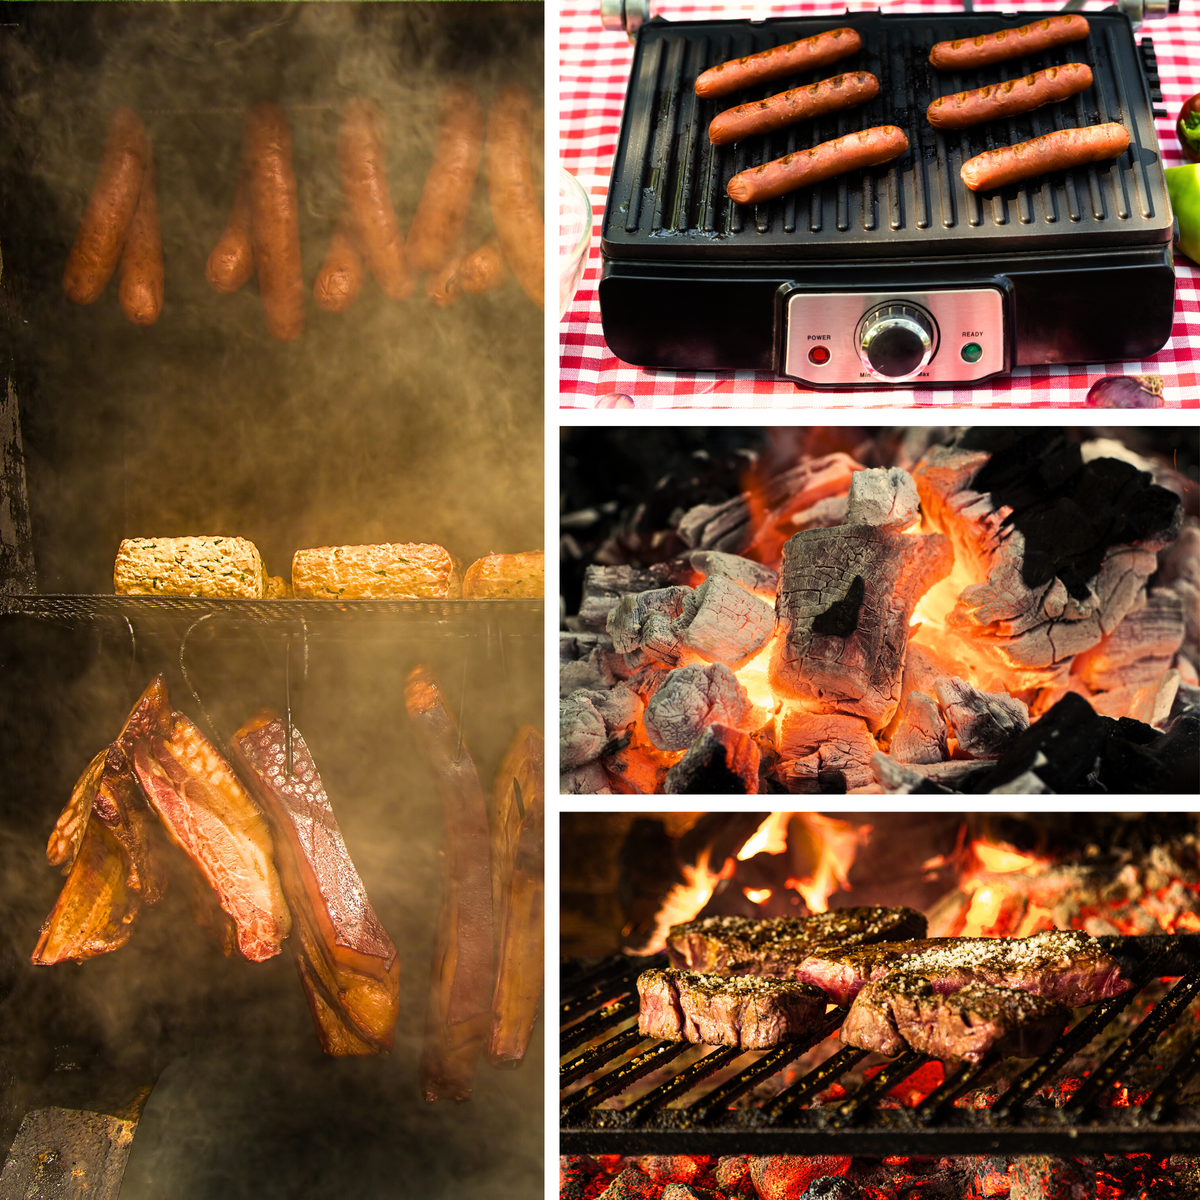 Smoked meats in smoker, electric grill with hotdogs, open hot coals, steaks on grill grate